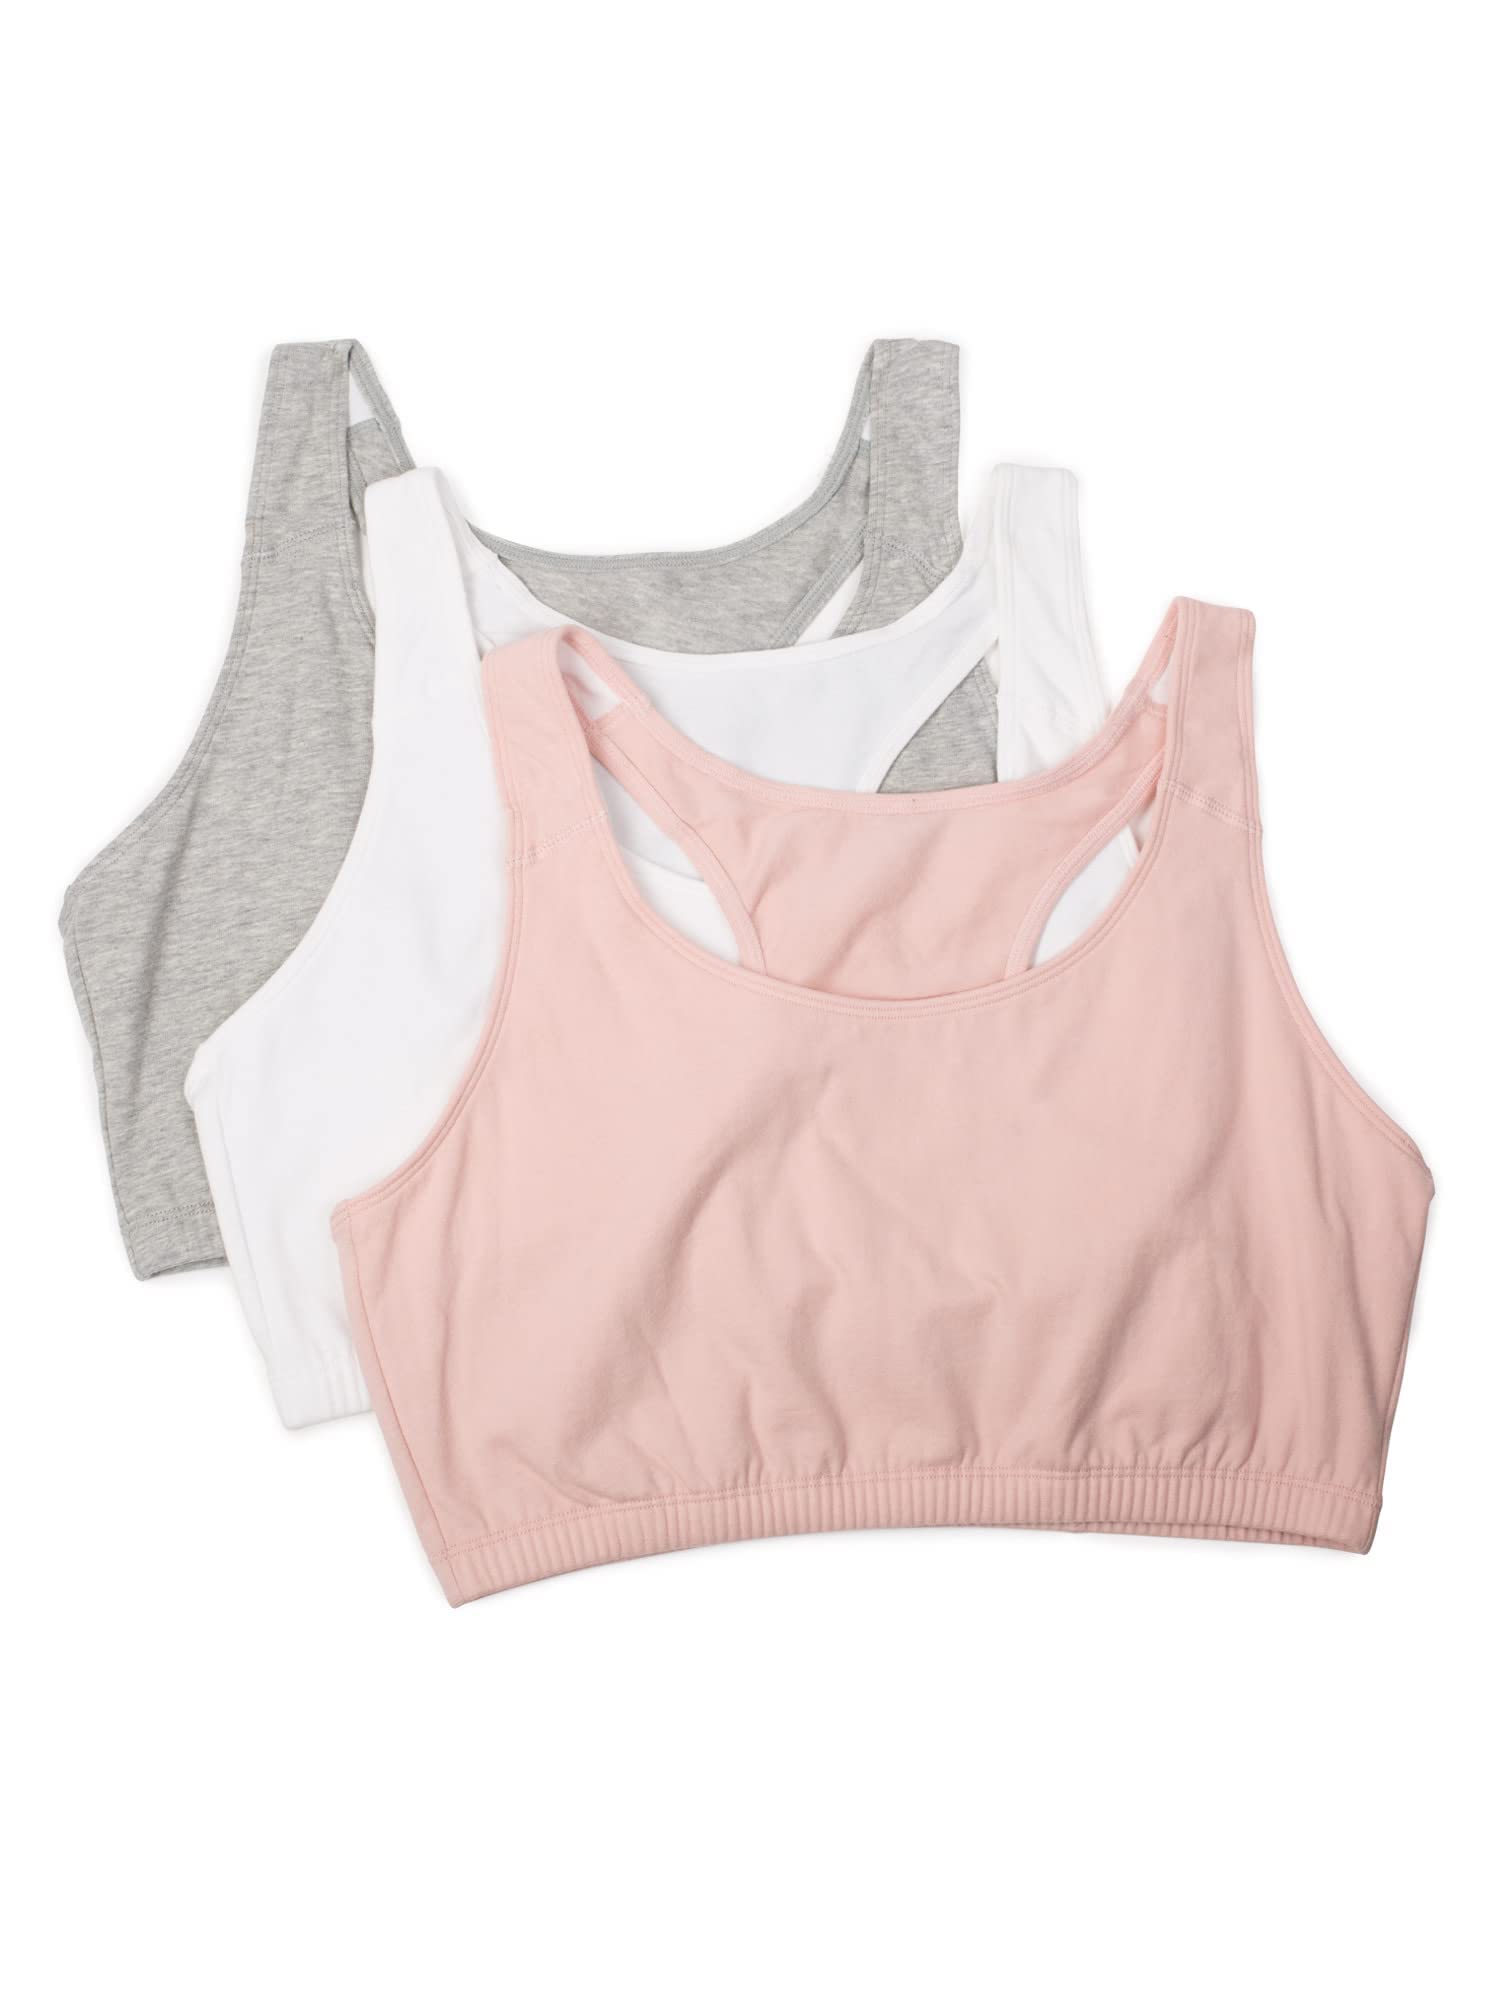 3-Pack Fruit of the Loom Women's Built Up Tank Style Sports Bra $7.62